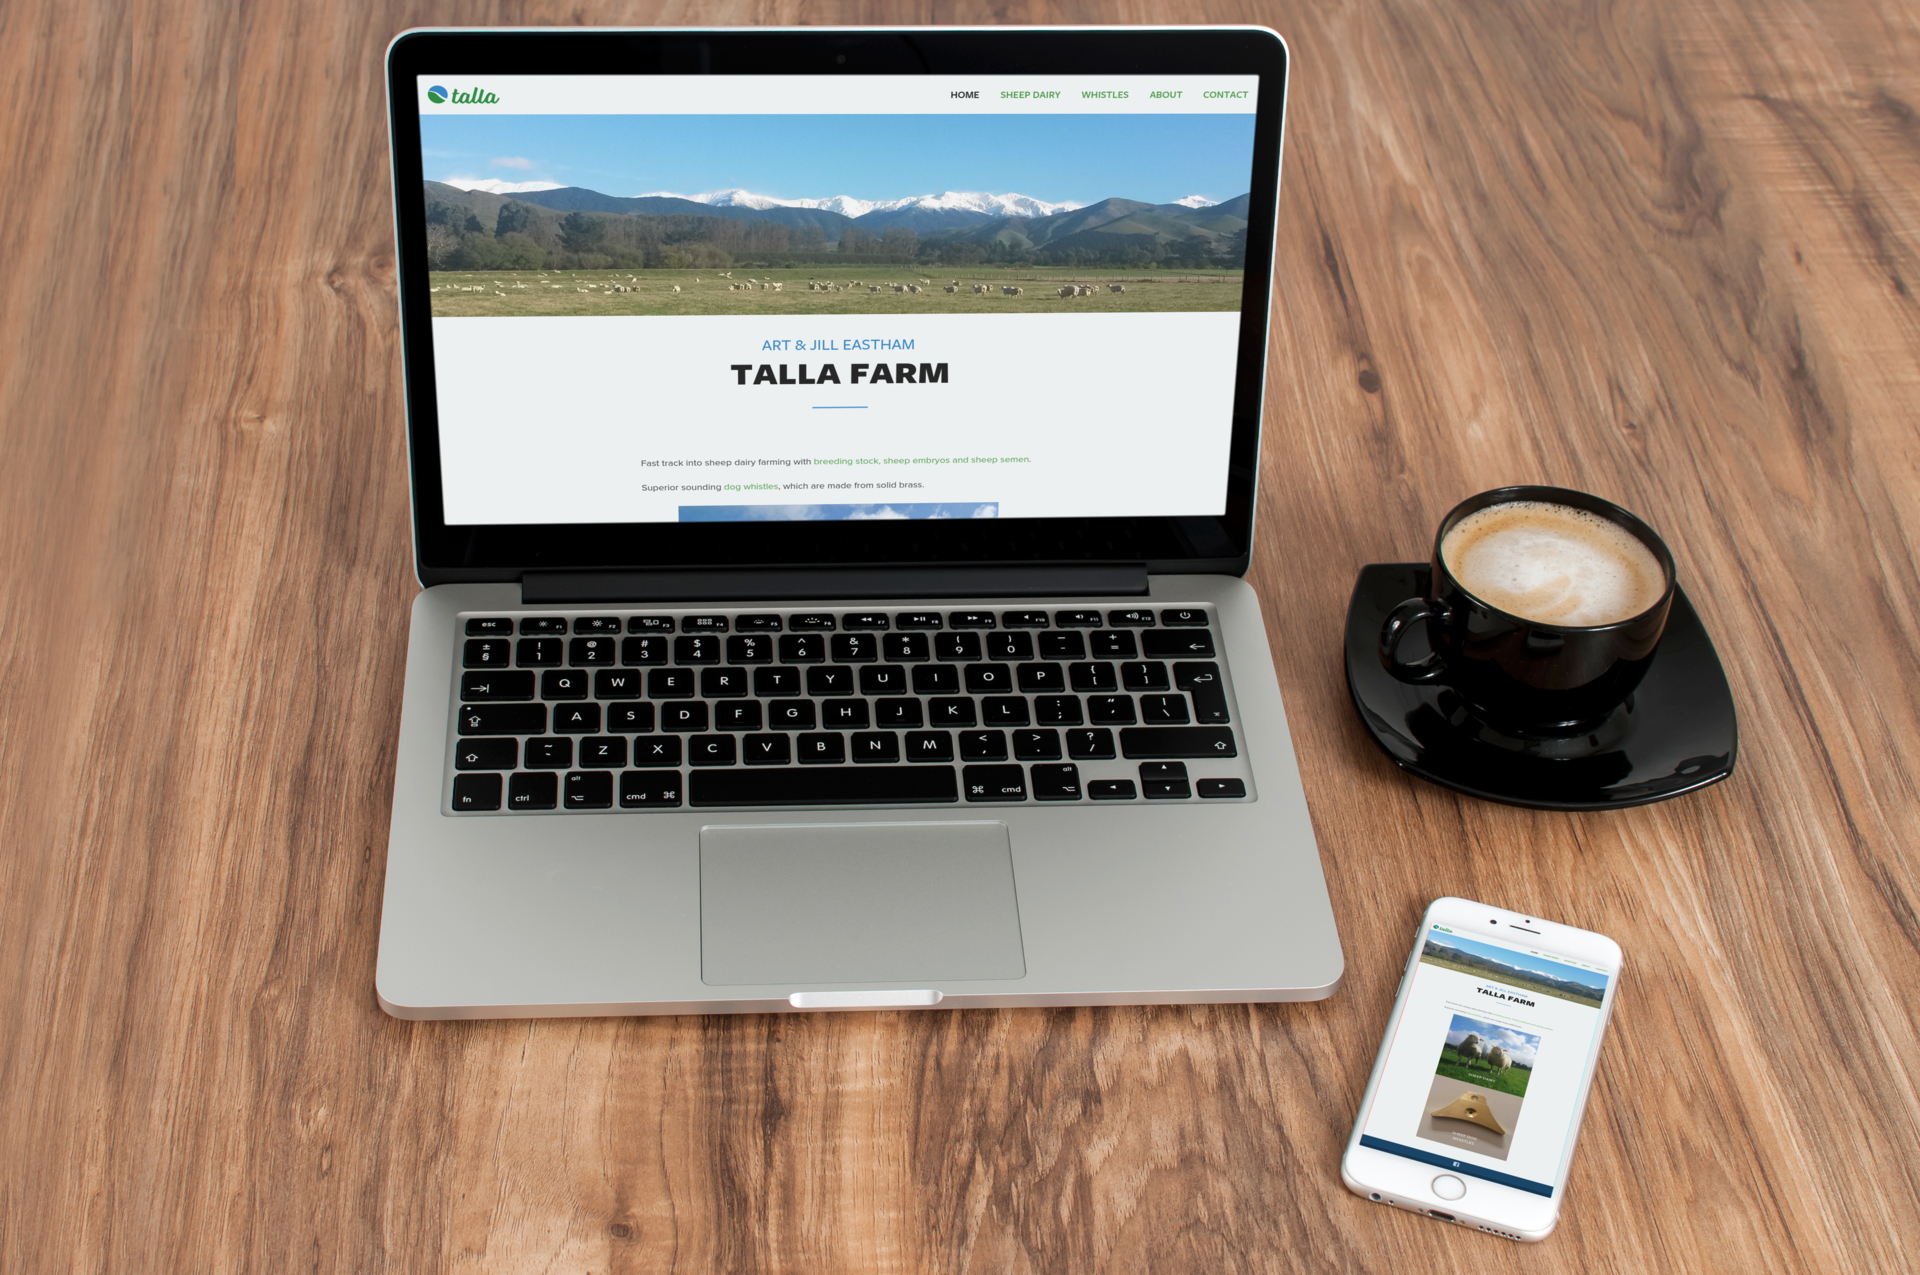 Mockup of the Talla Farm website on a laptop and a smartphone